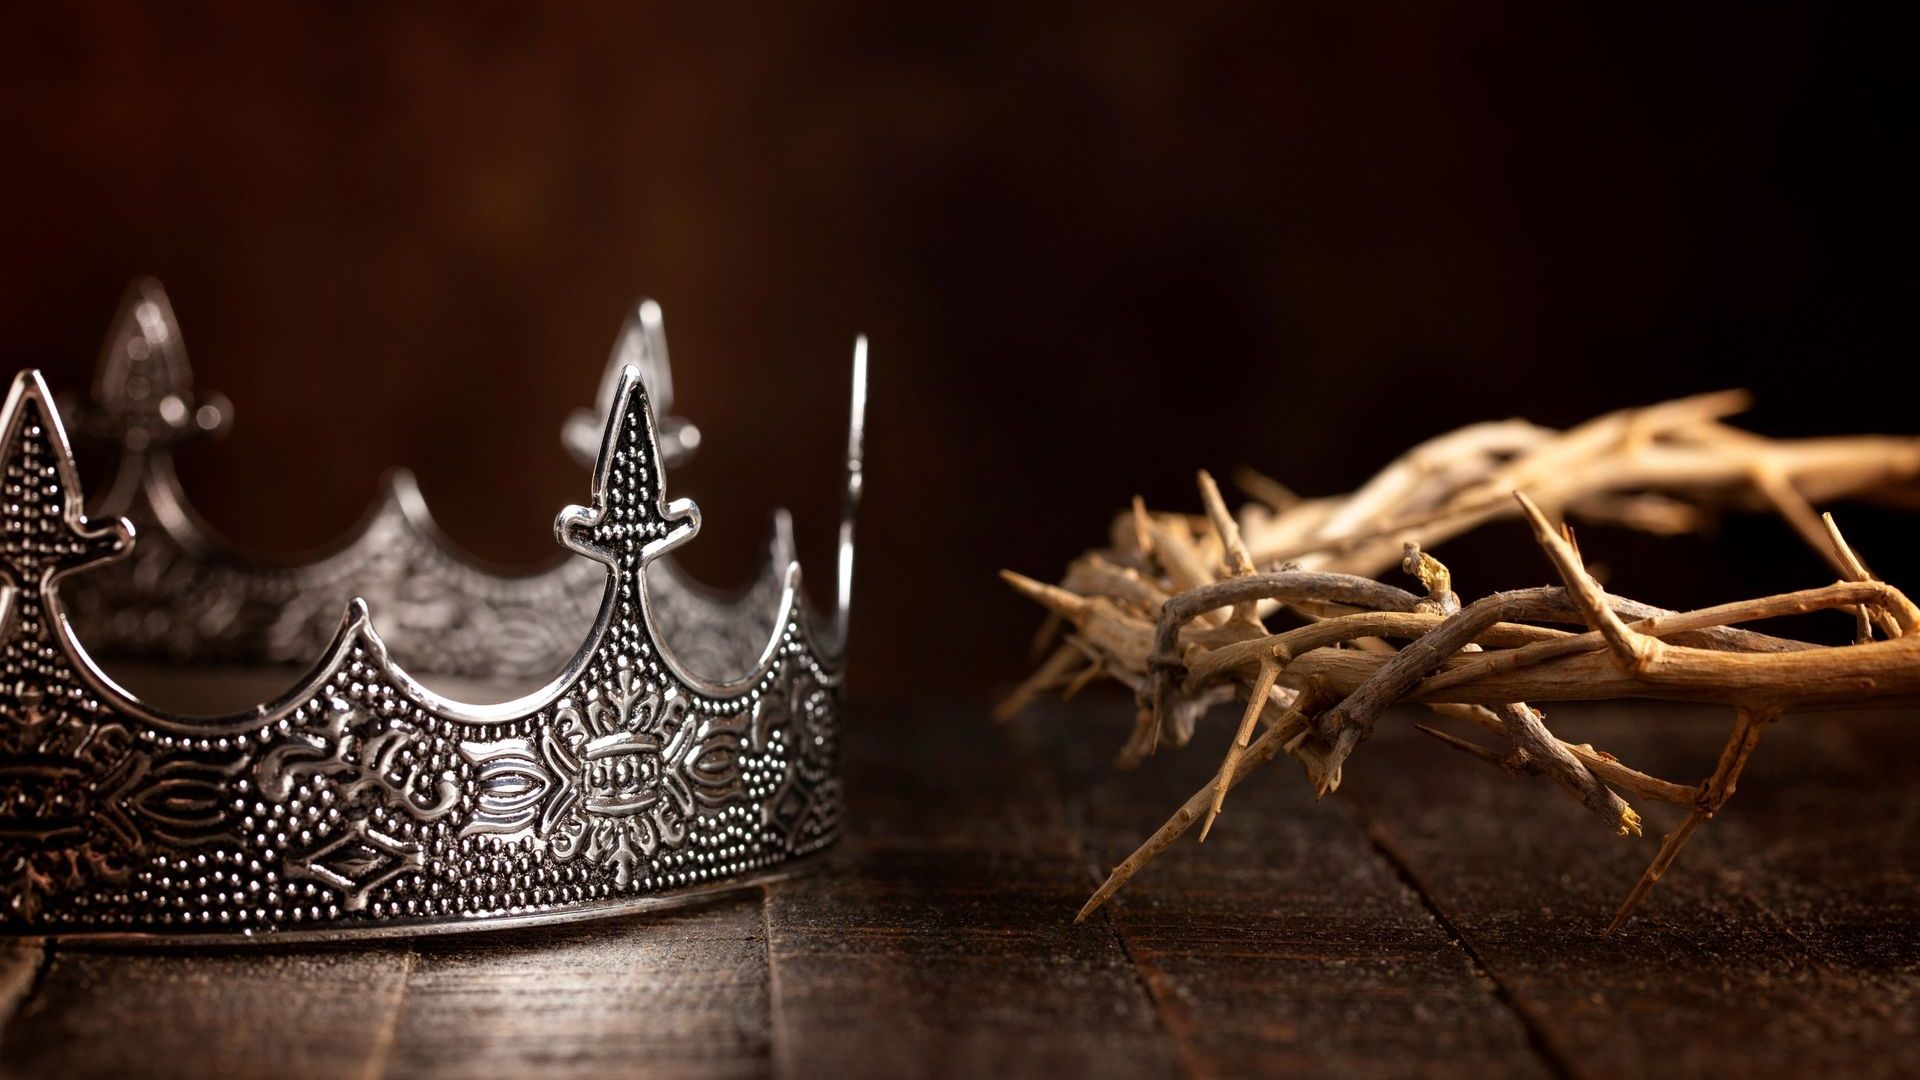 Two crowns, one made of metal and the other of thorns